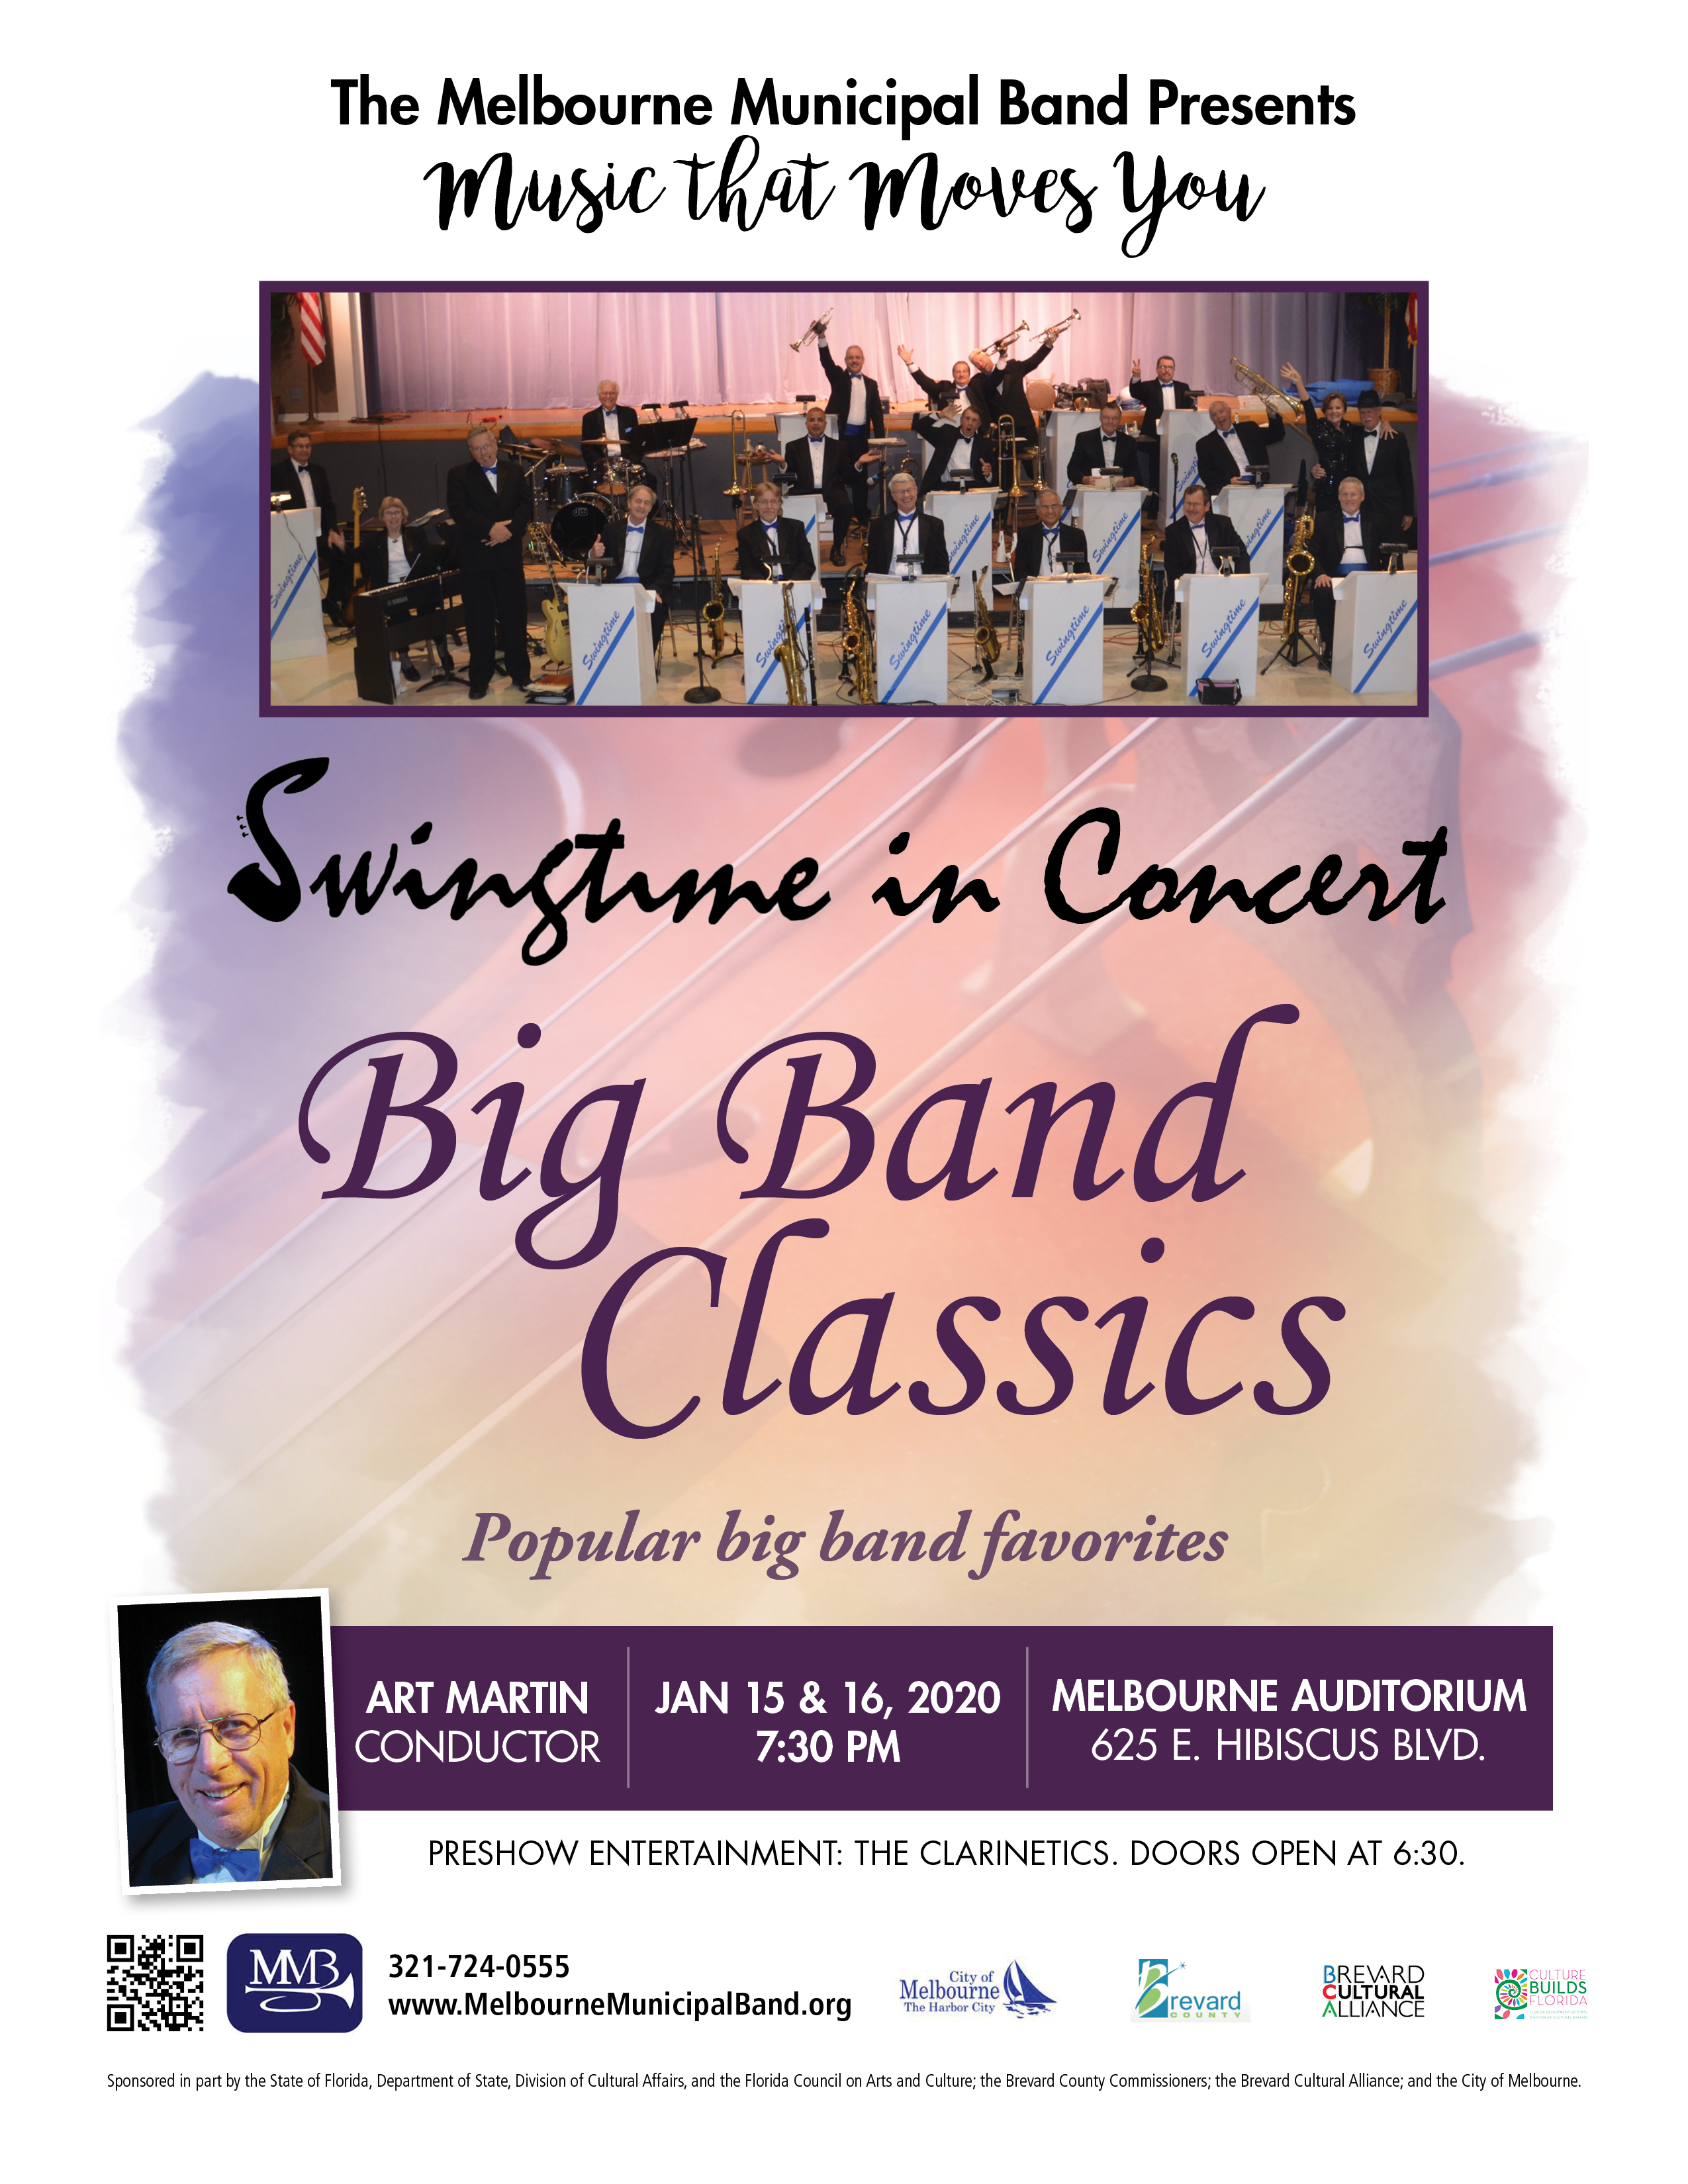 Big Band Classics presented by The Melbourne Municipal Band